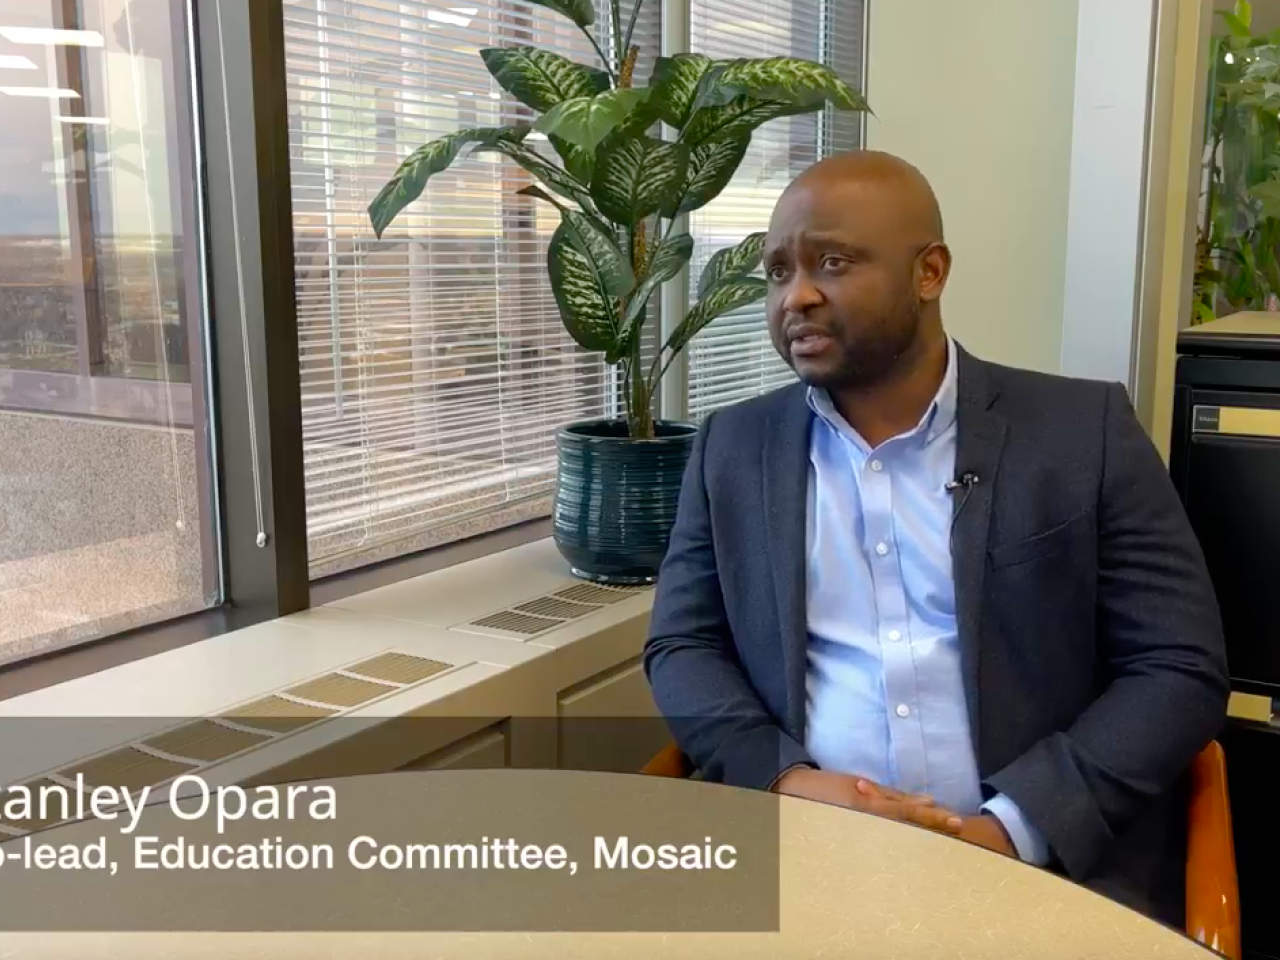 Stanley Opara, Co-Lead Education Committee, Mosaic